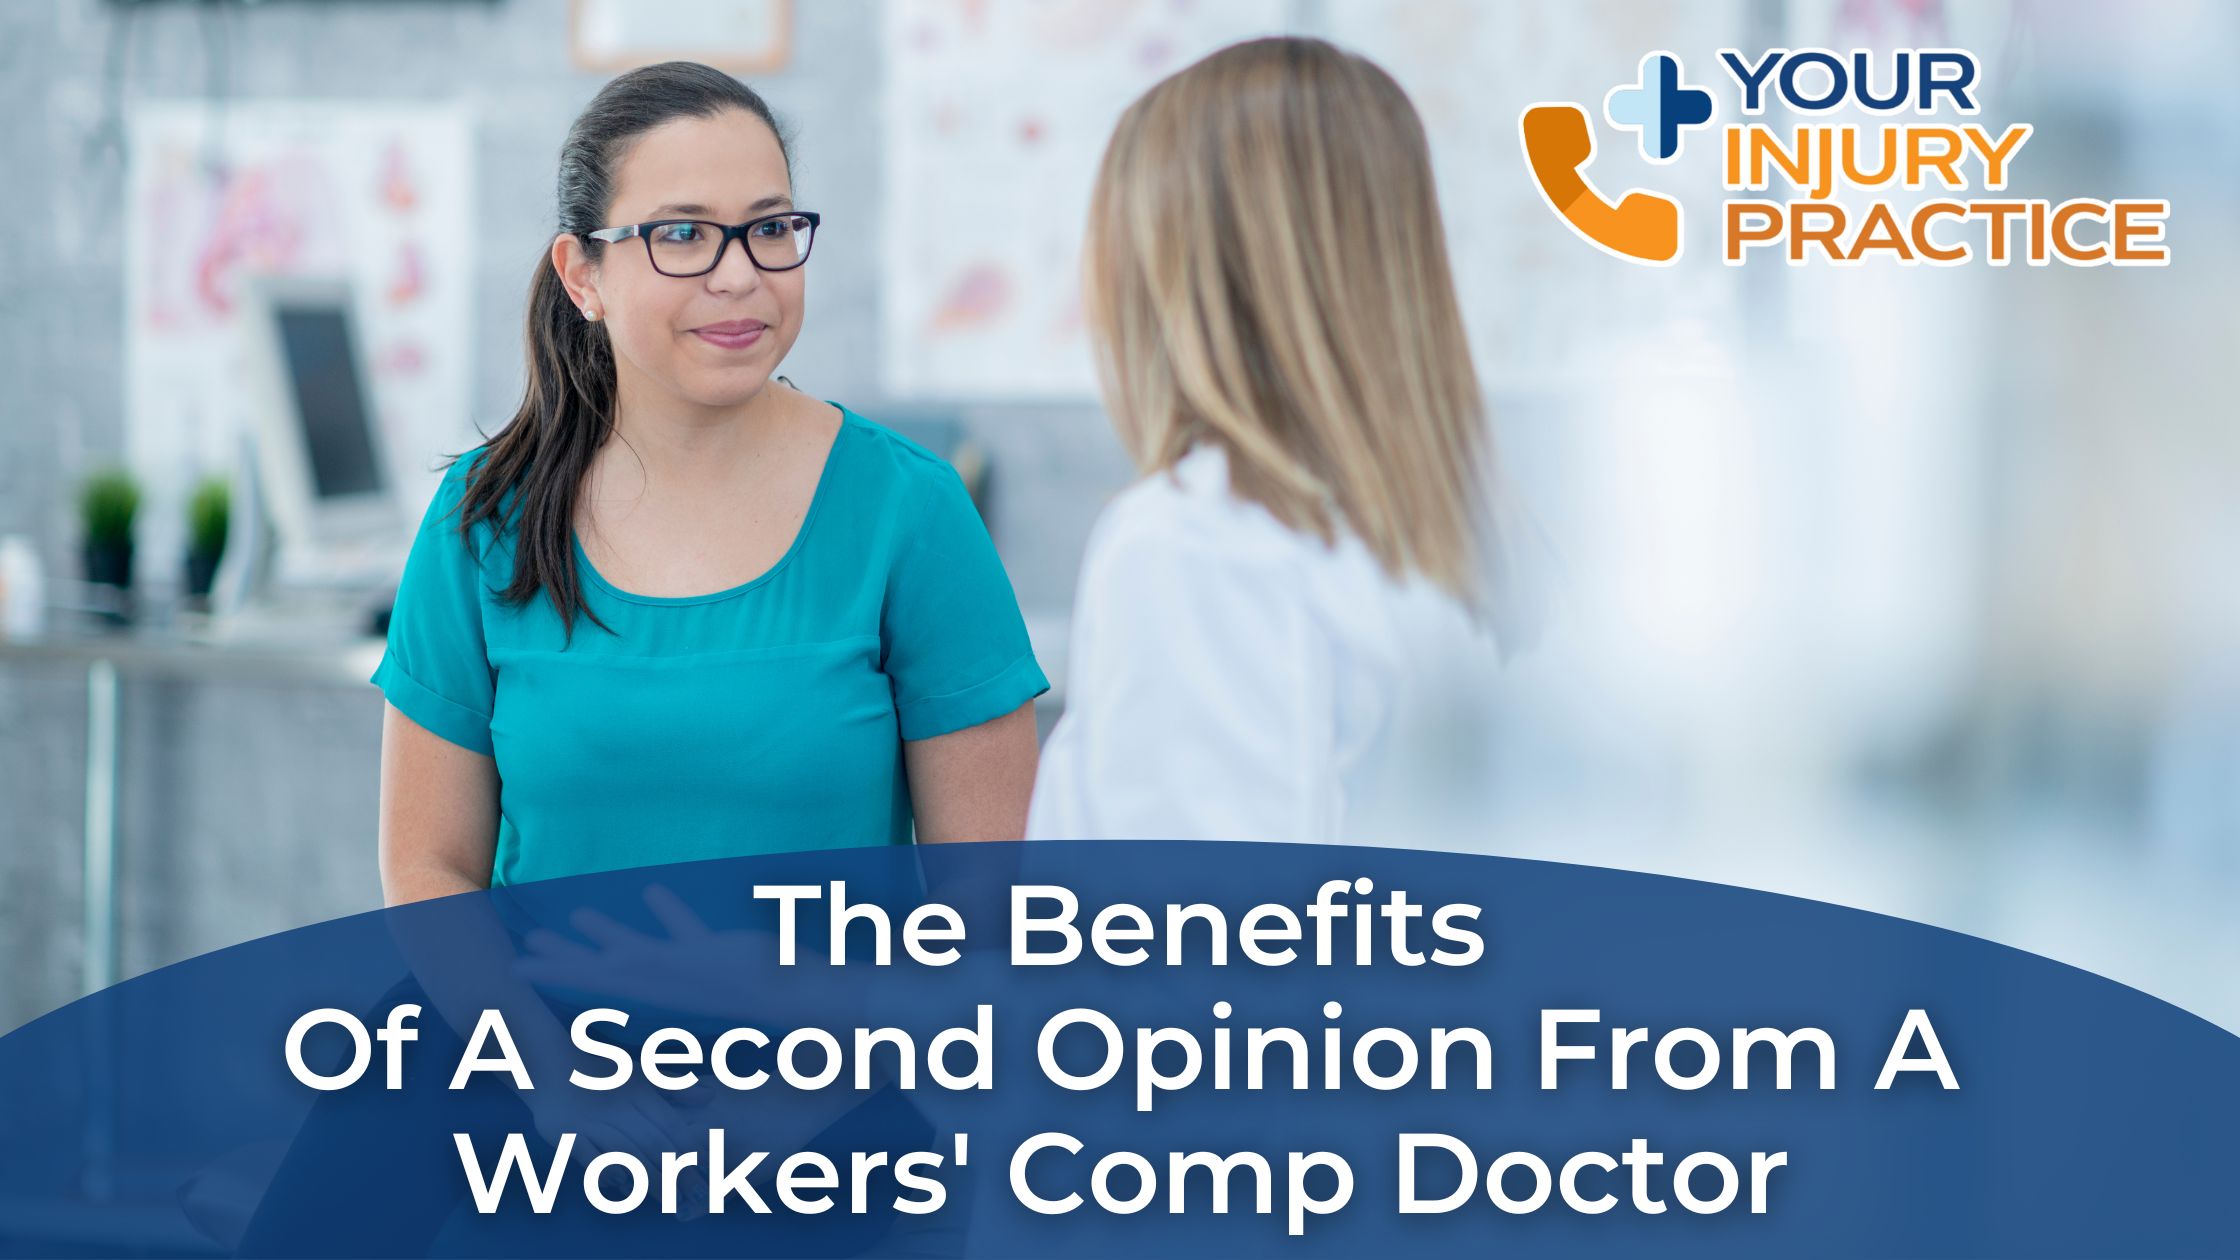 The Benefits of a Second Opinion from a Workers' Comp Doctor